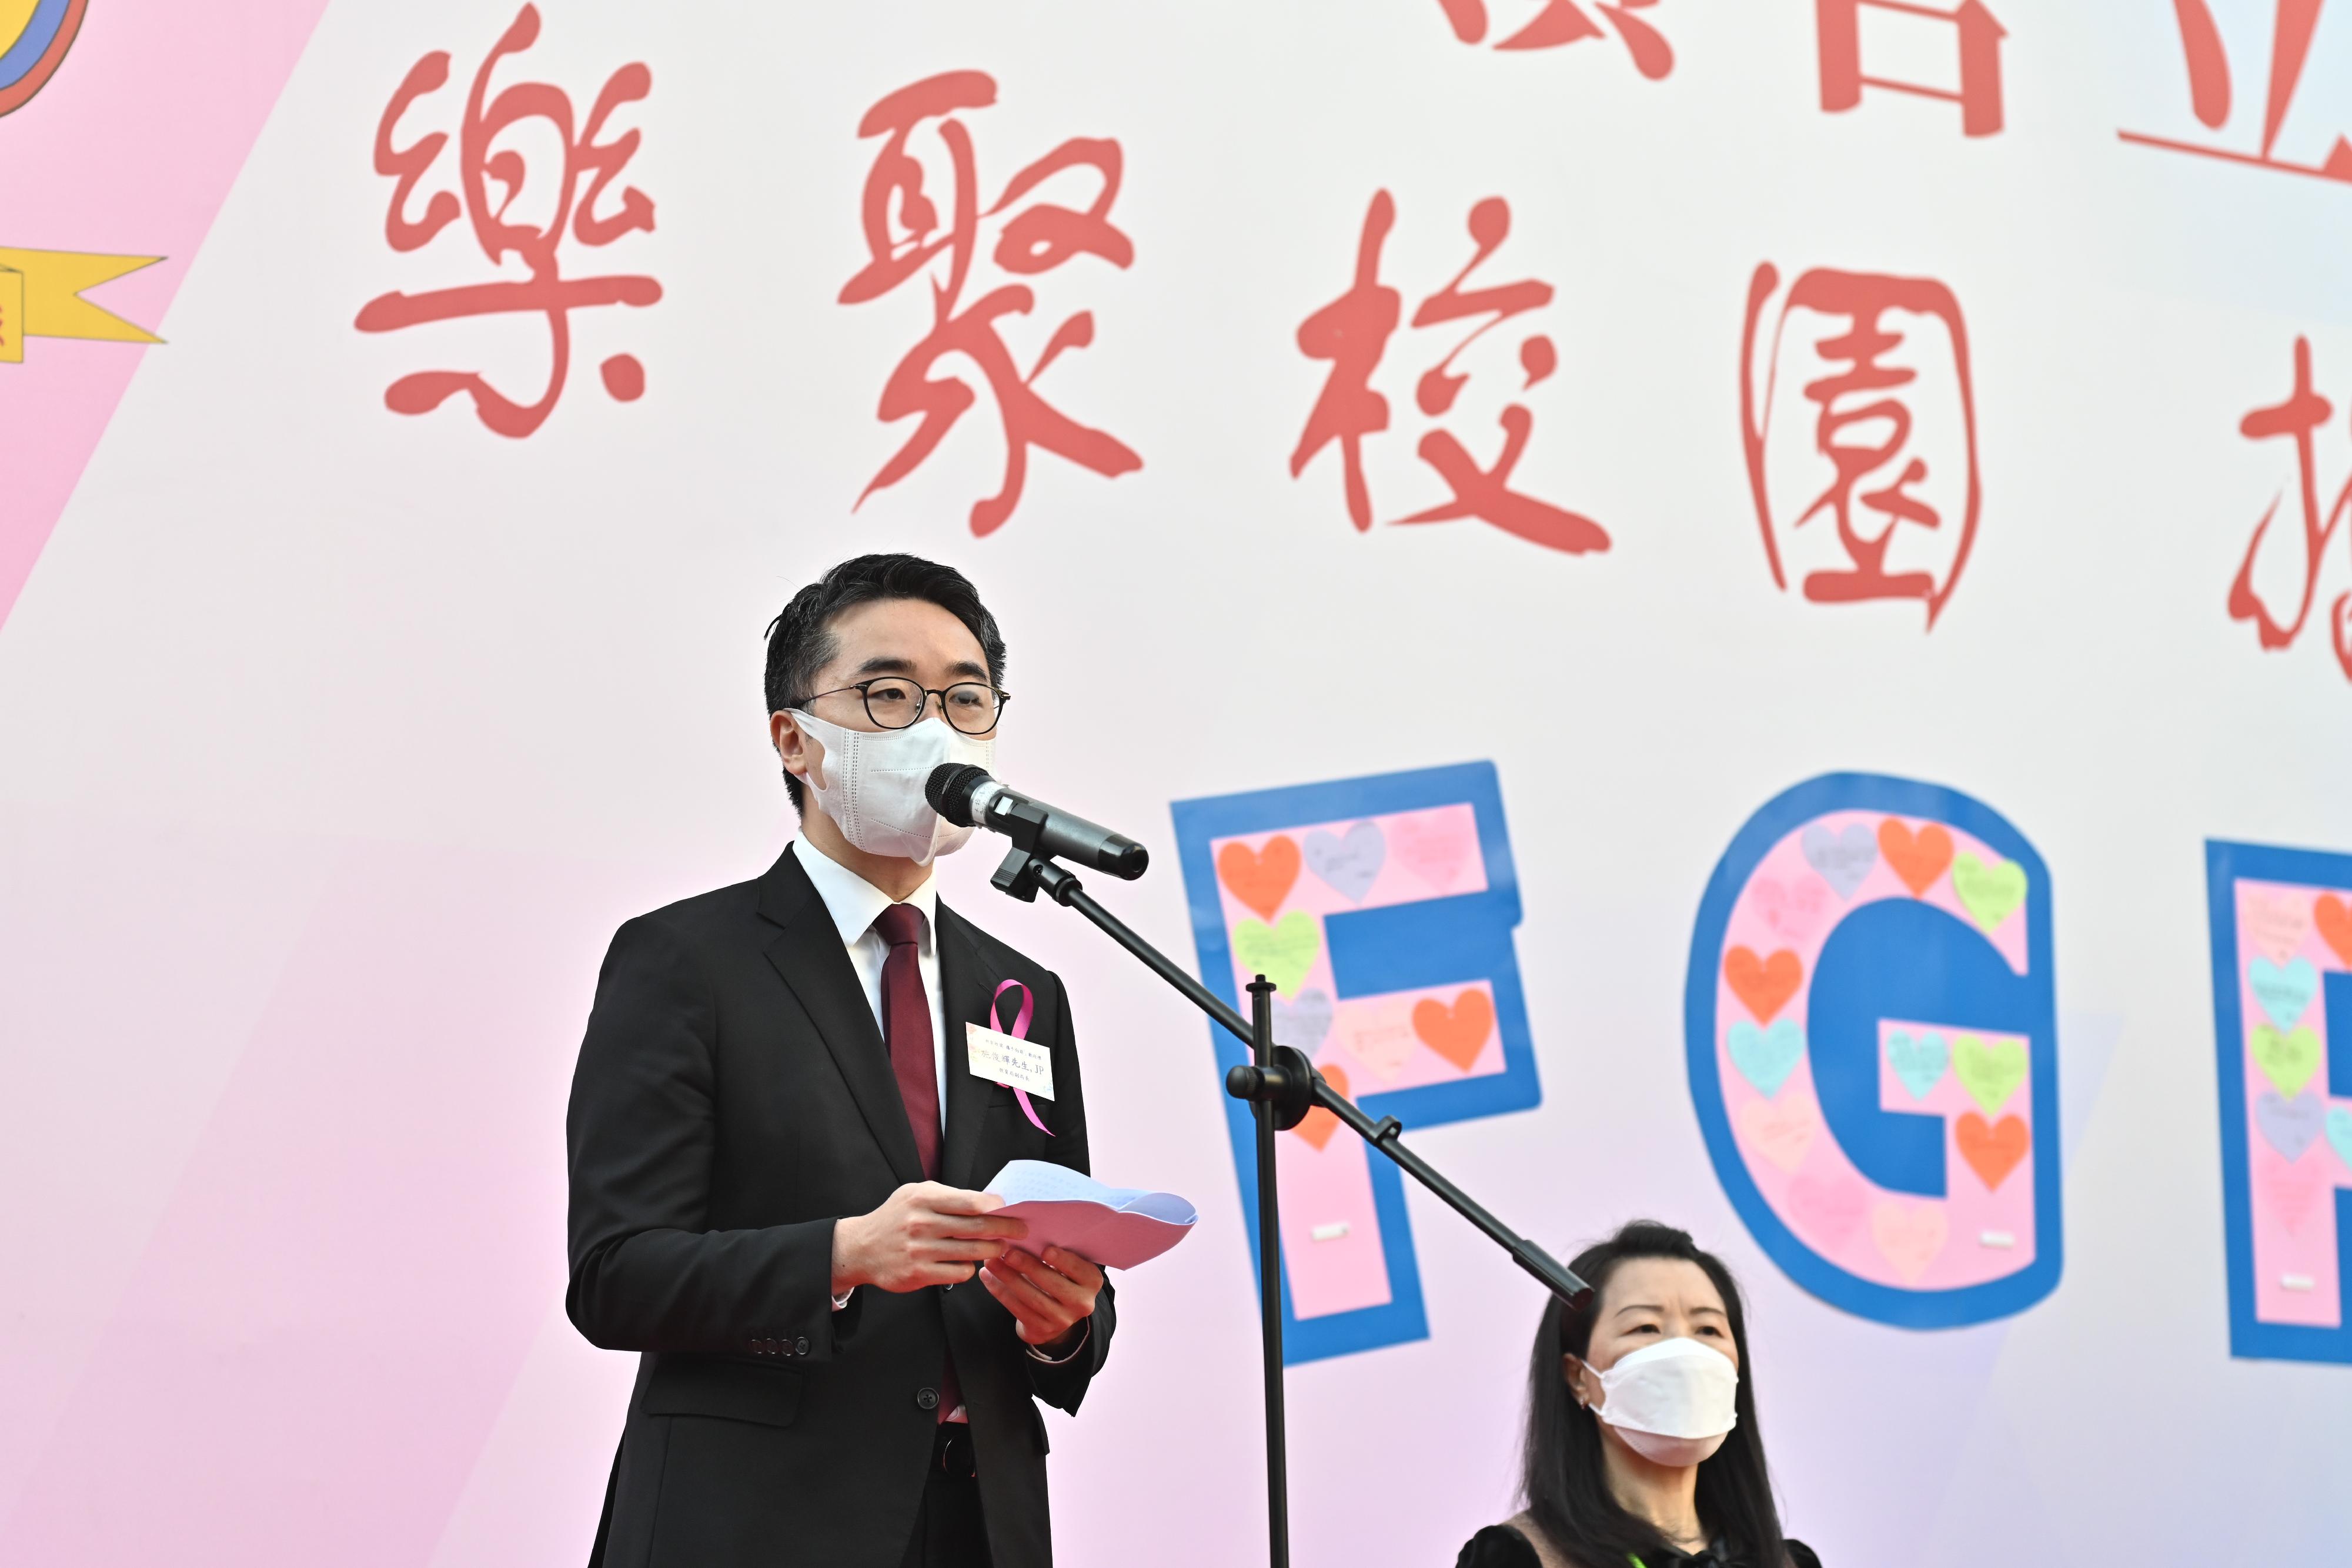 The Under Secretary for Education, Mr Sze Chun-fai, visited Fanling Government Primary School this morning (February 22) to learn about the class resumption of cross-boundary students. Photo shows Mr Sze (left) delivering a speech at a welcome ceremony for cross-boundary students.